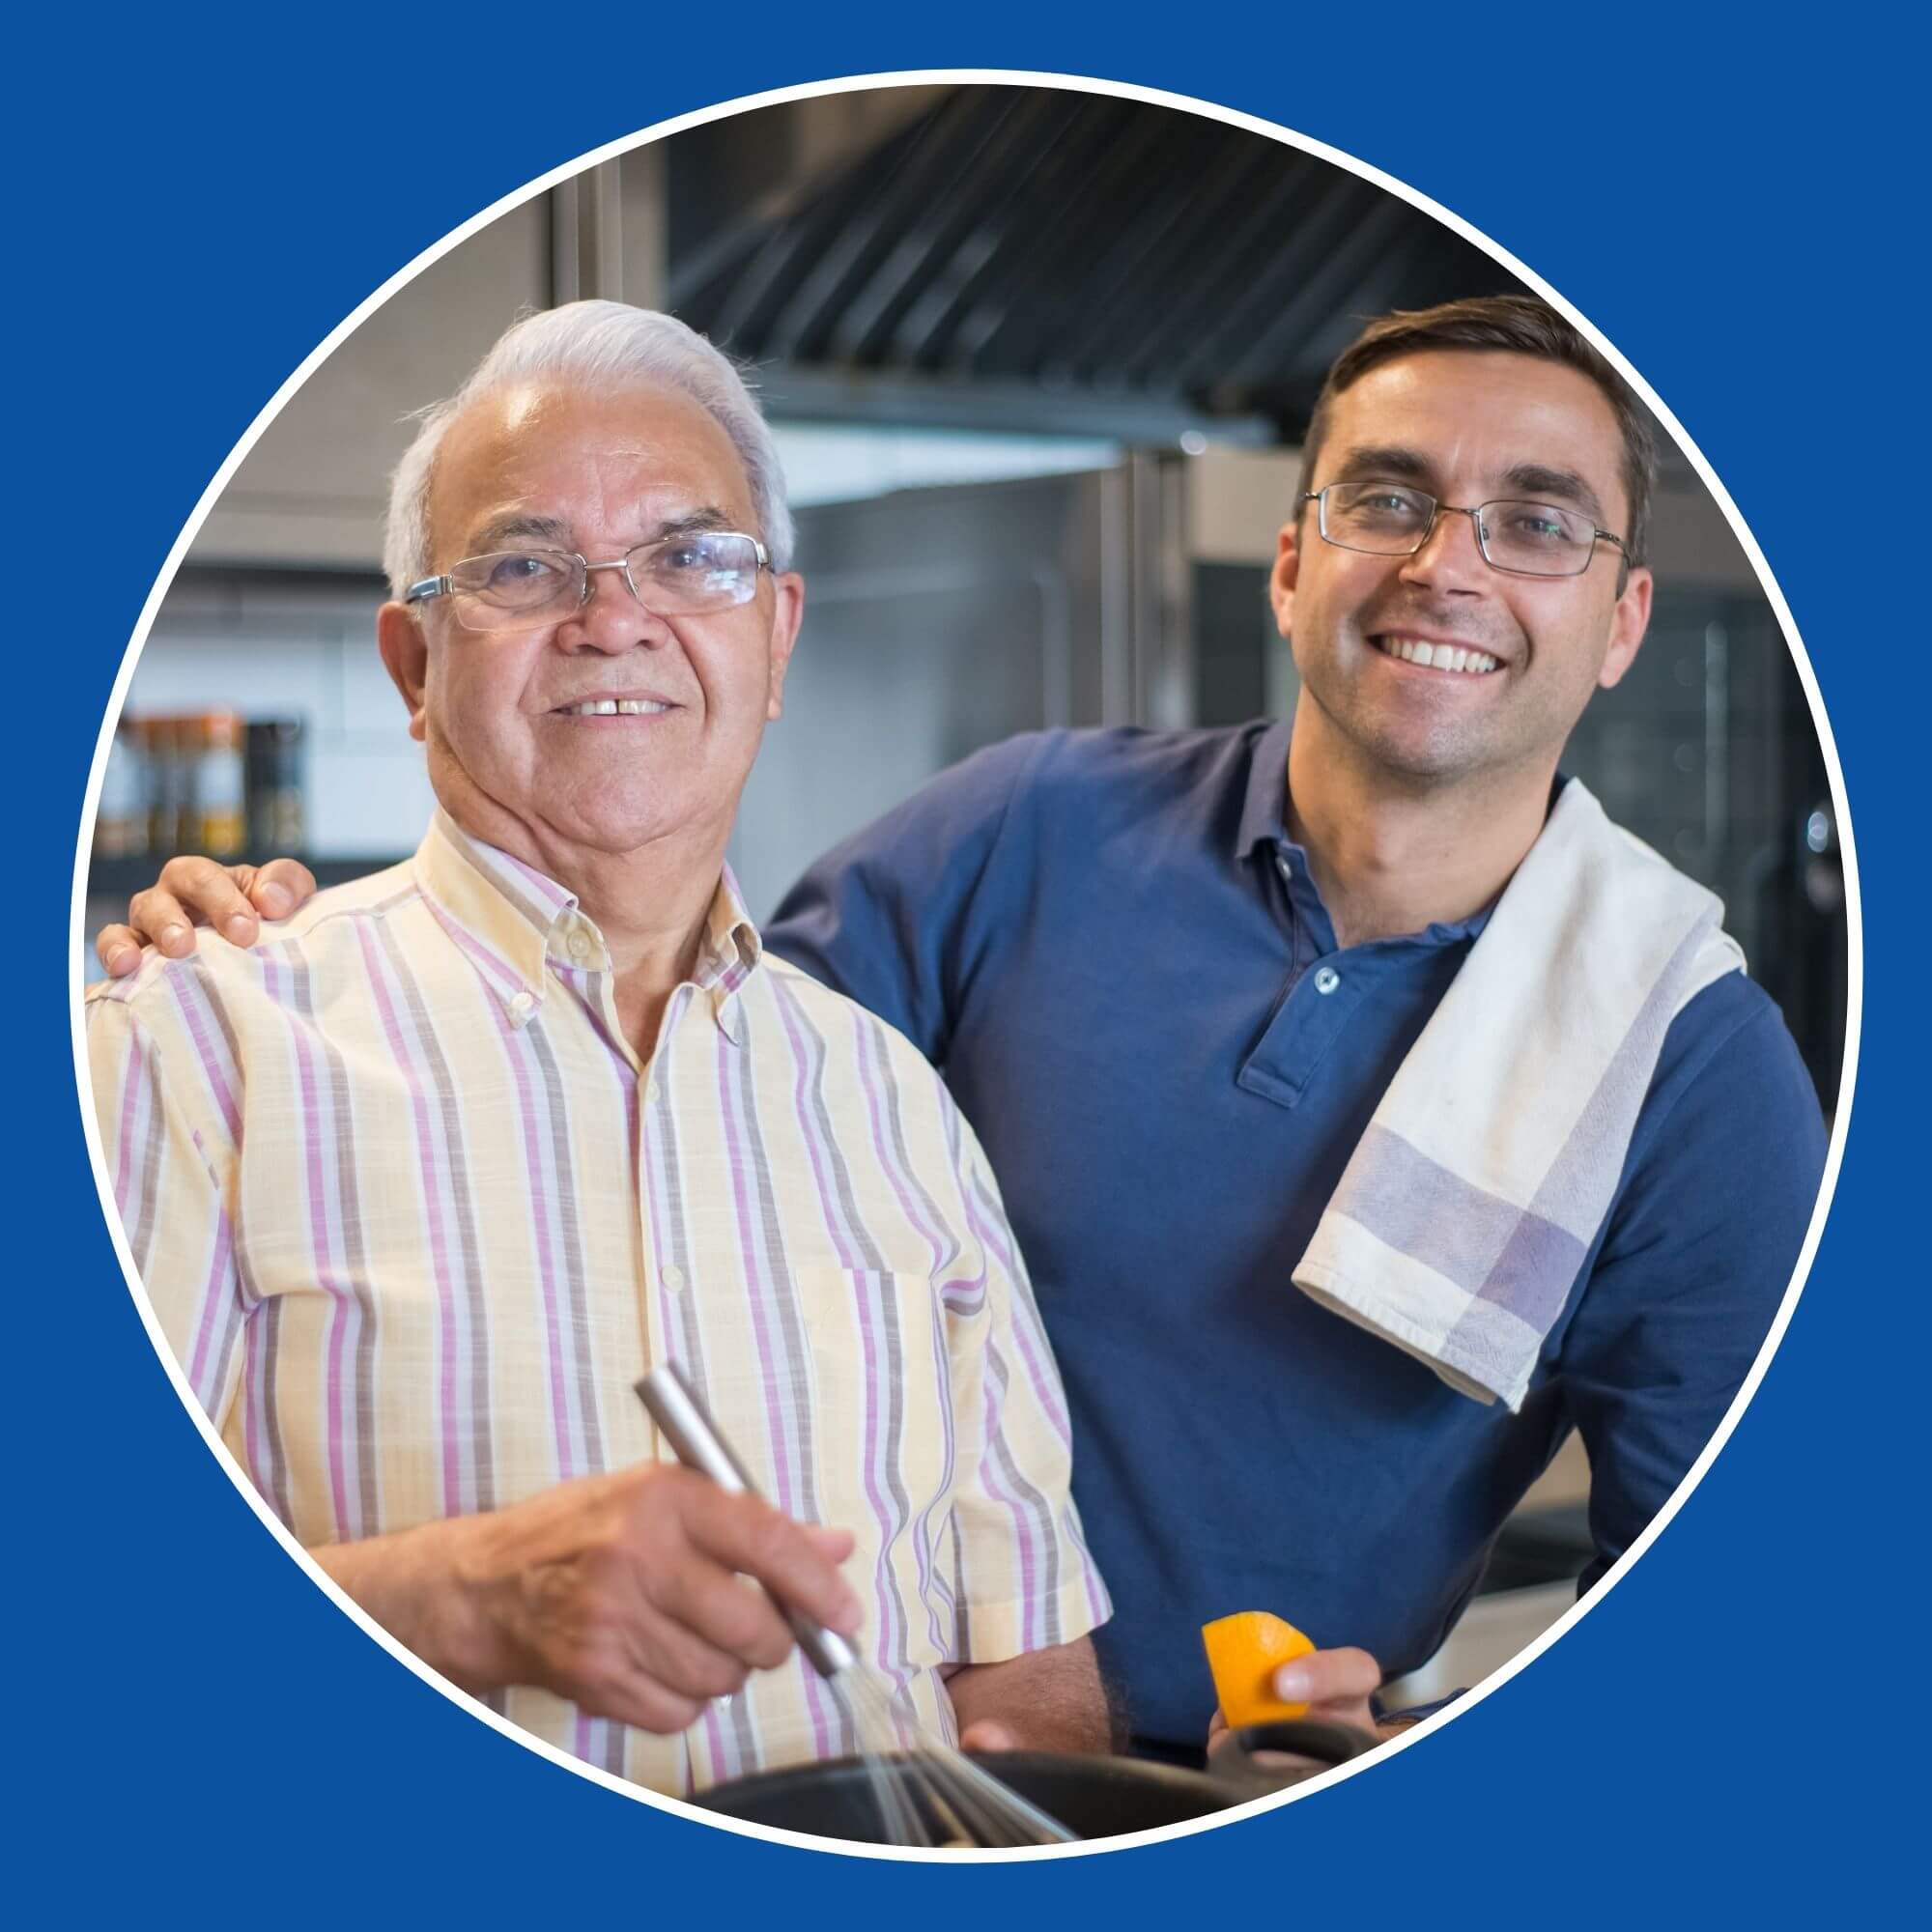 The photo shows a father and son smiling and cooking together. Image from Pexels (Photographer is Kampus Productions)